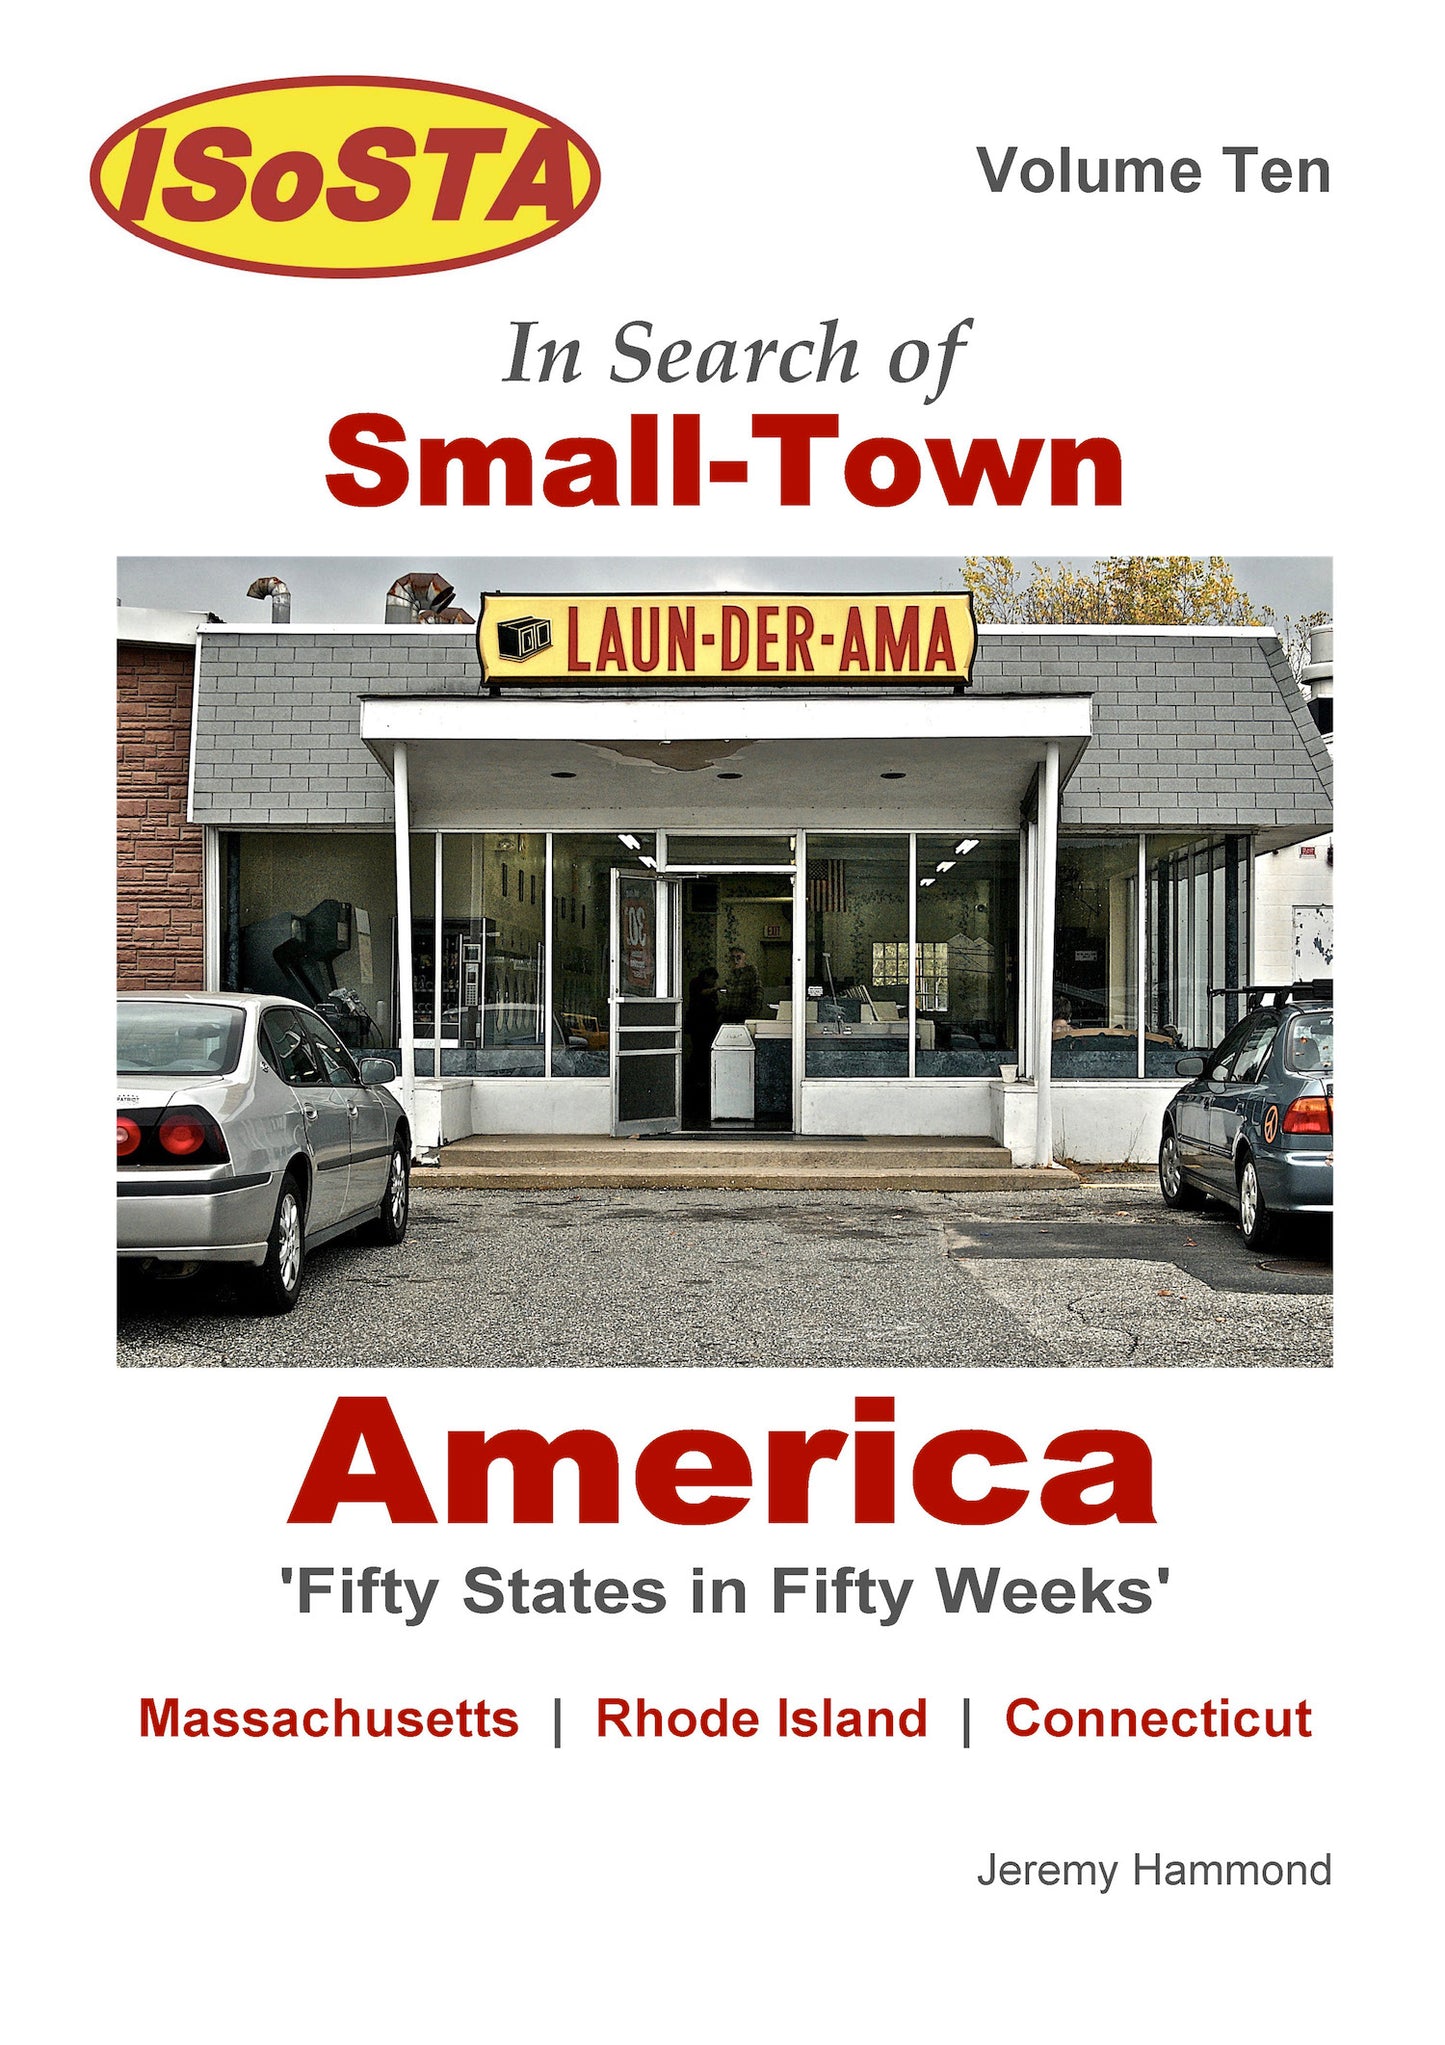 In Search of Small-Town America: Volume 10